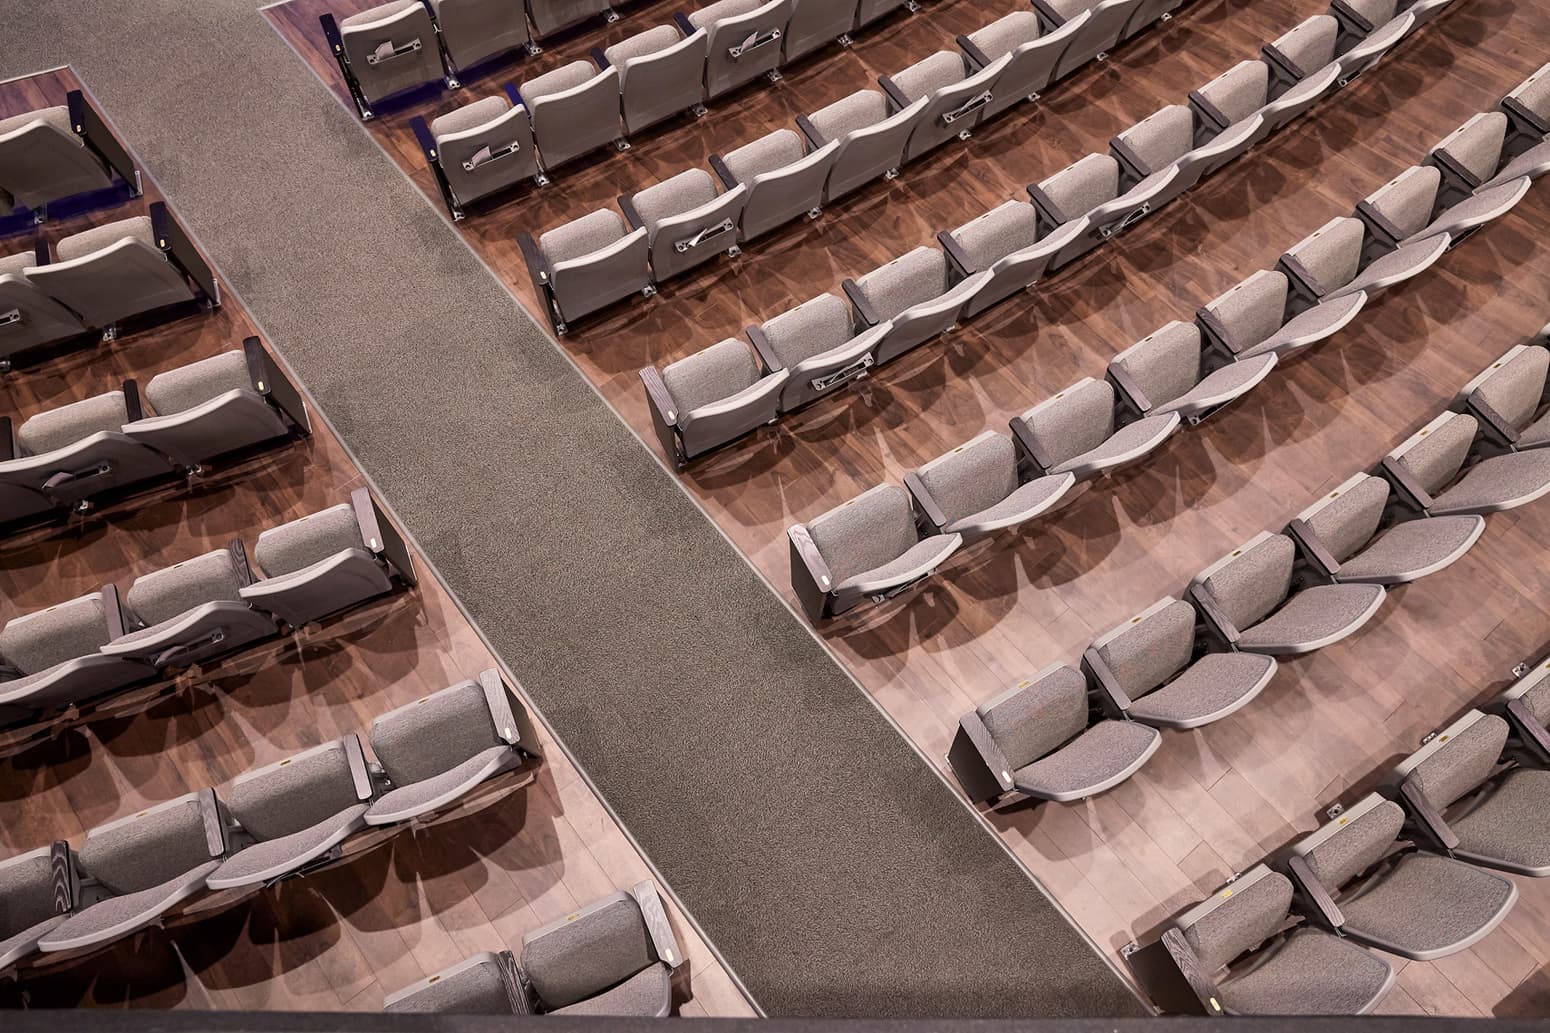 This auditorium design project maximized seating without sacrificing comfort.